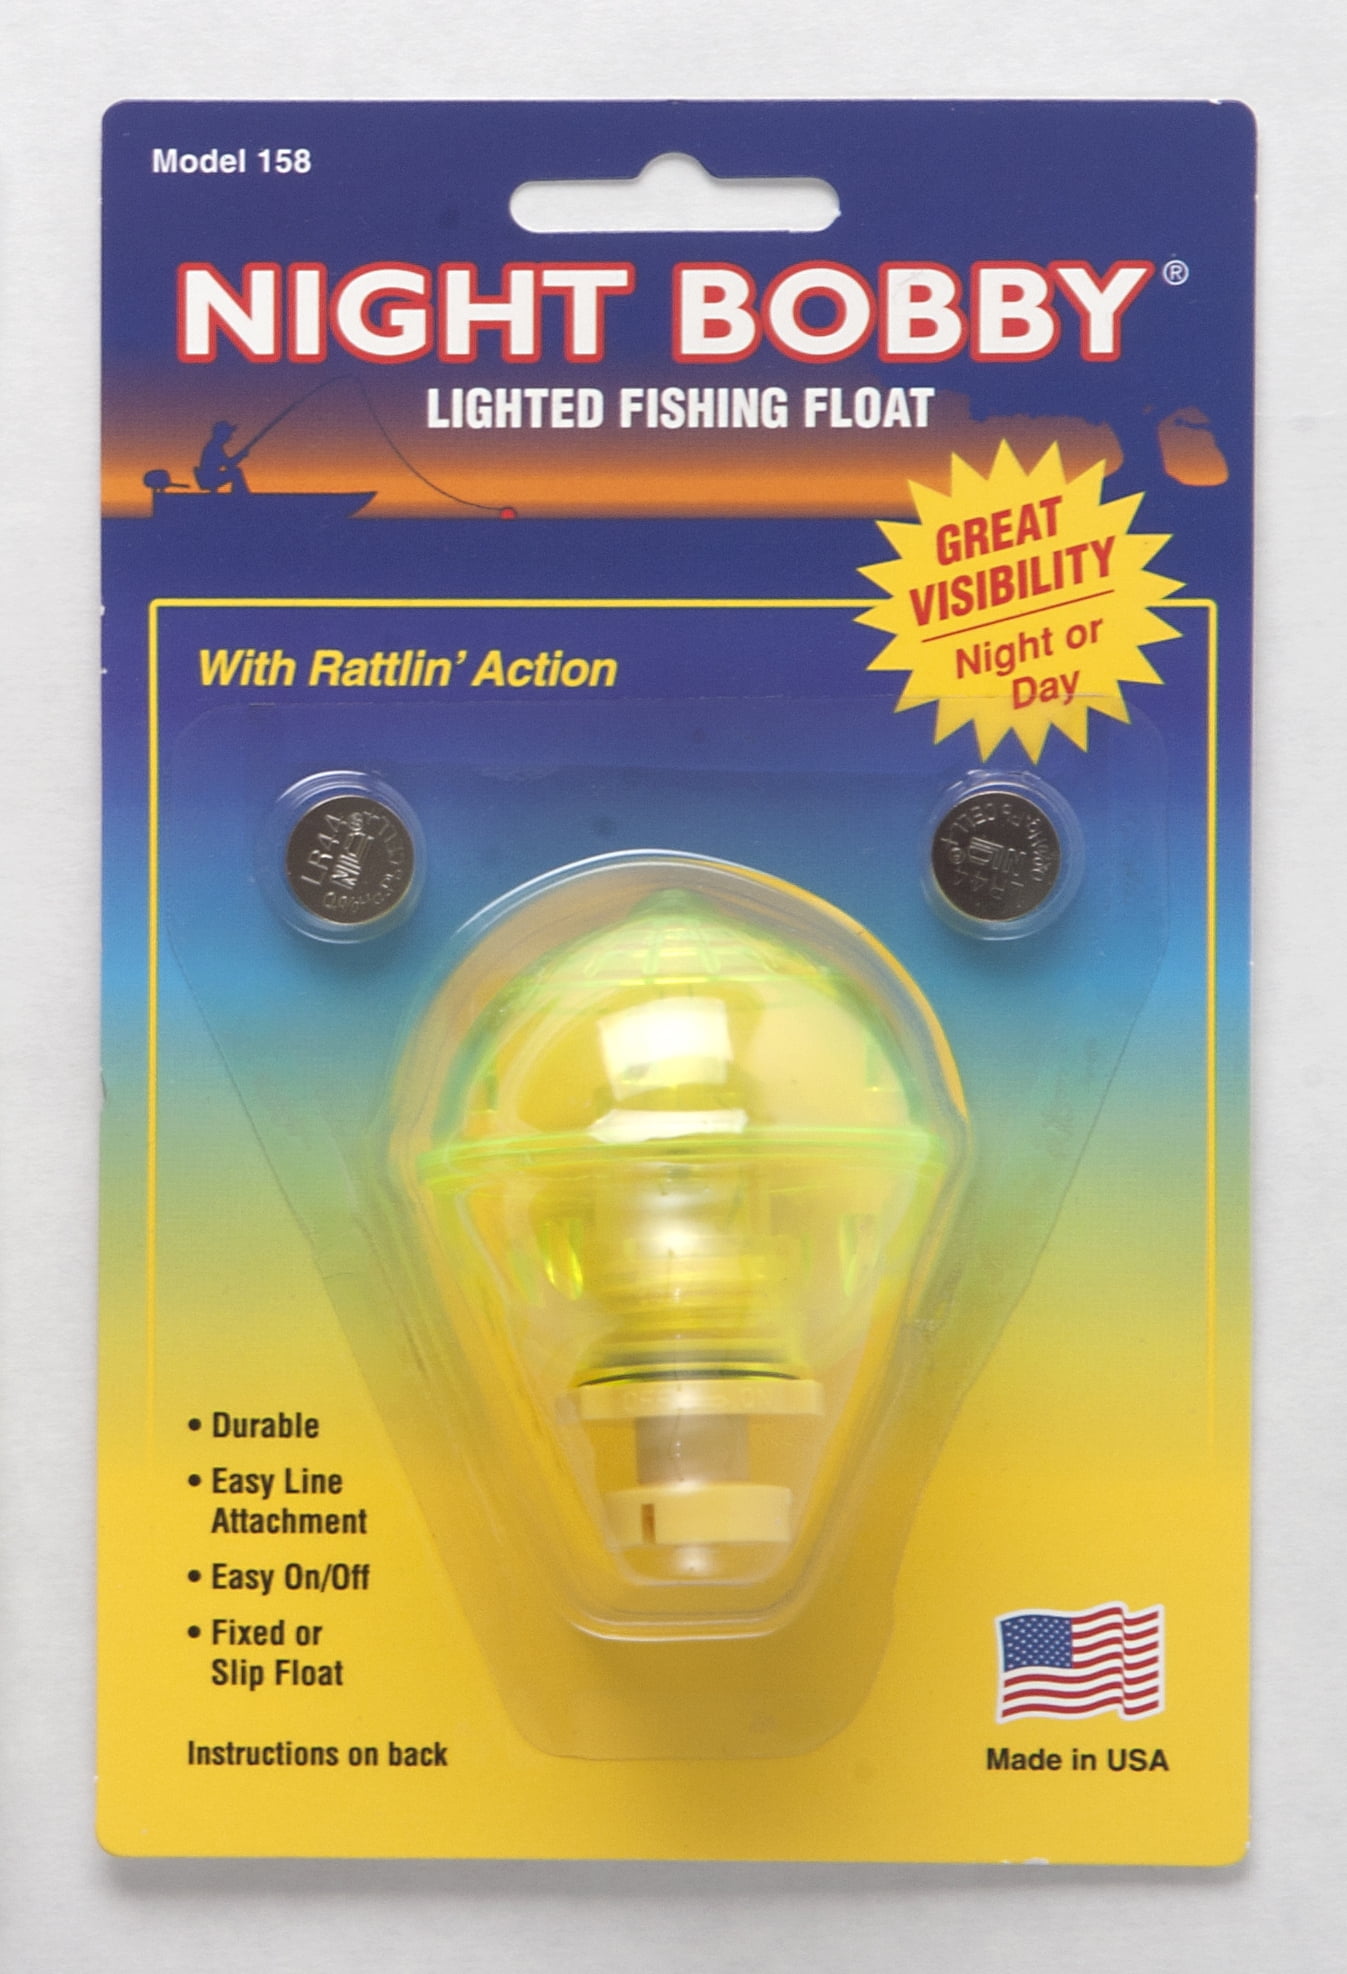 Night Bobby Lighted Fishing Float for Night Fishing, Red/Yellow, Small Round  